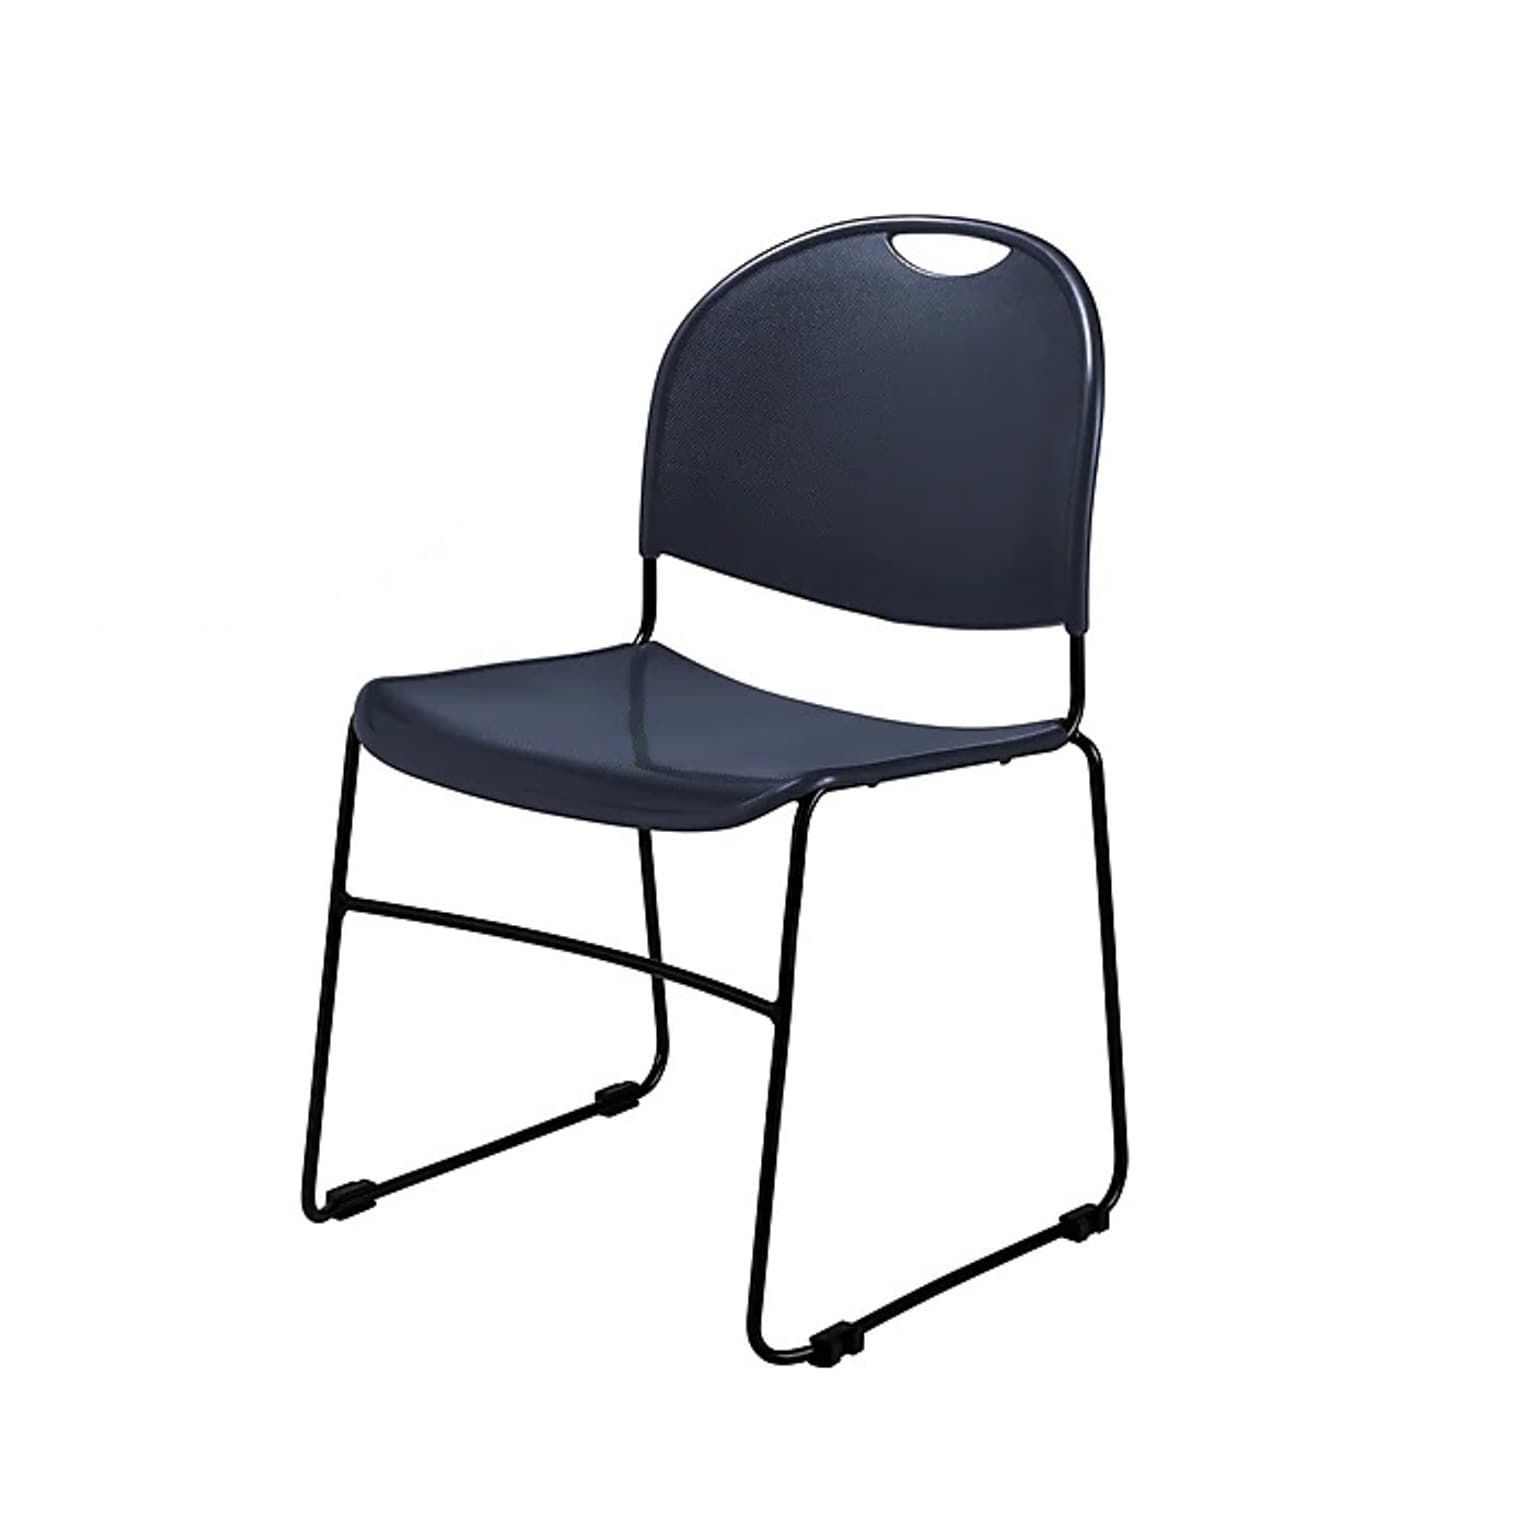 National Public Seating Commercialine 850 Series Ultra Compact Stack Chair, Blue, 40 Pack (855-CL/40)